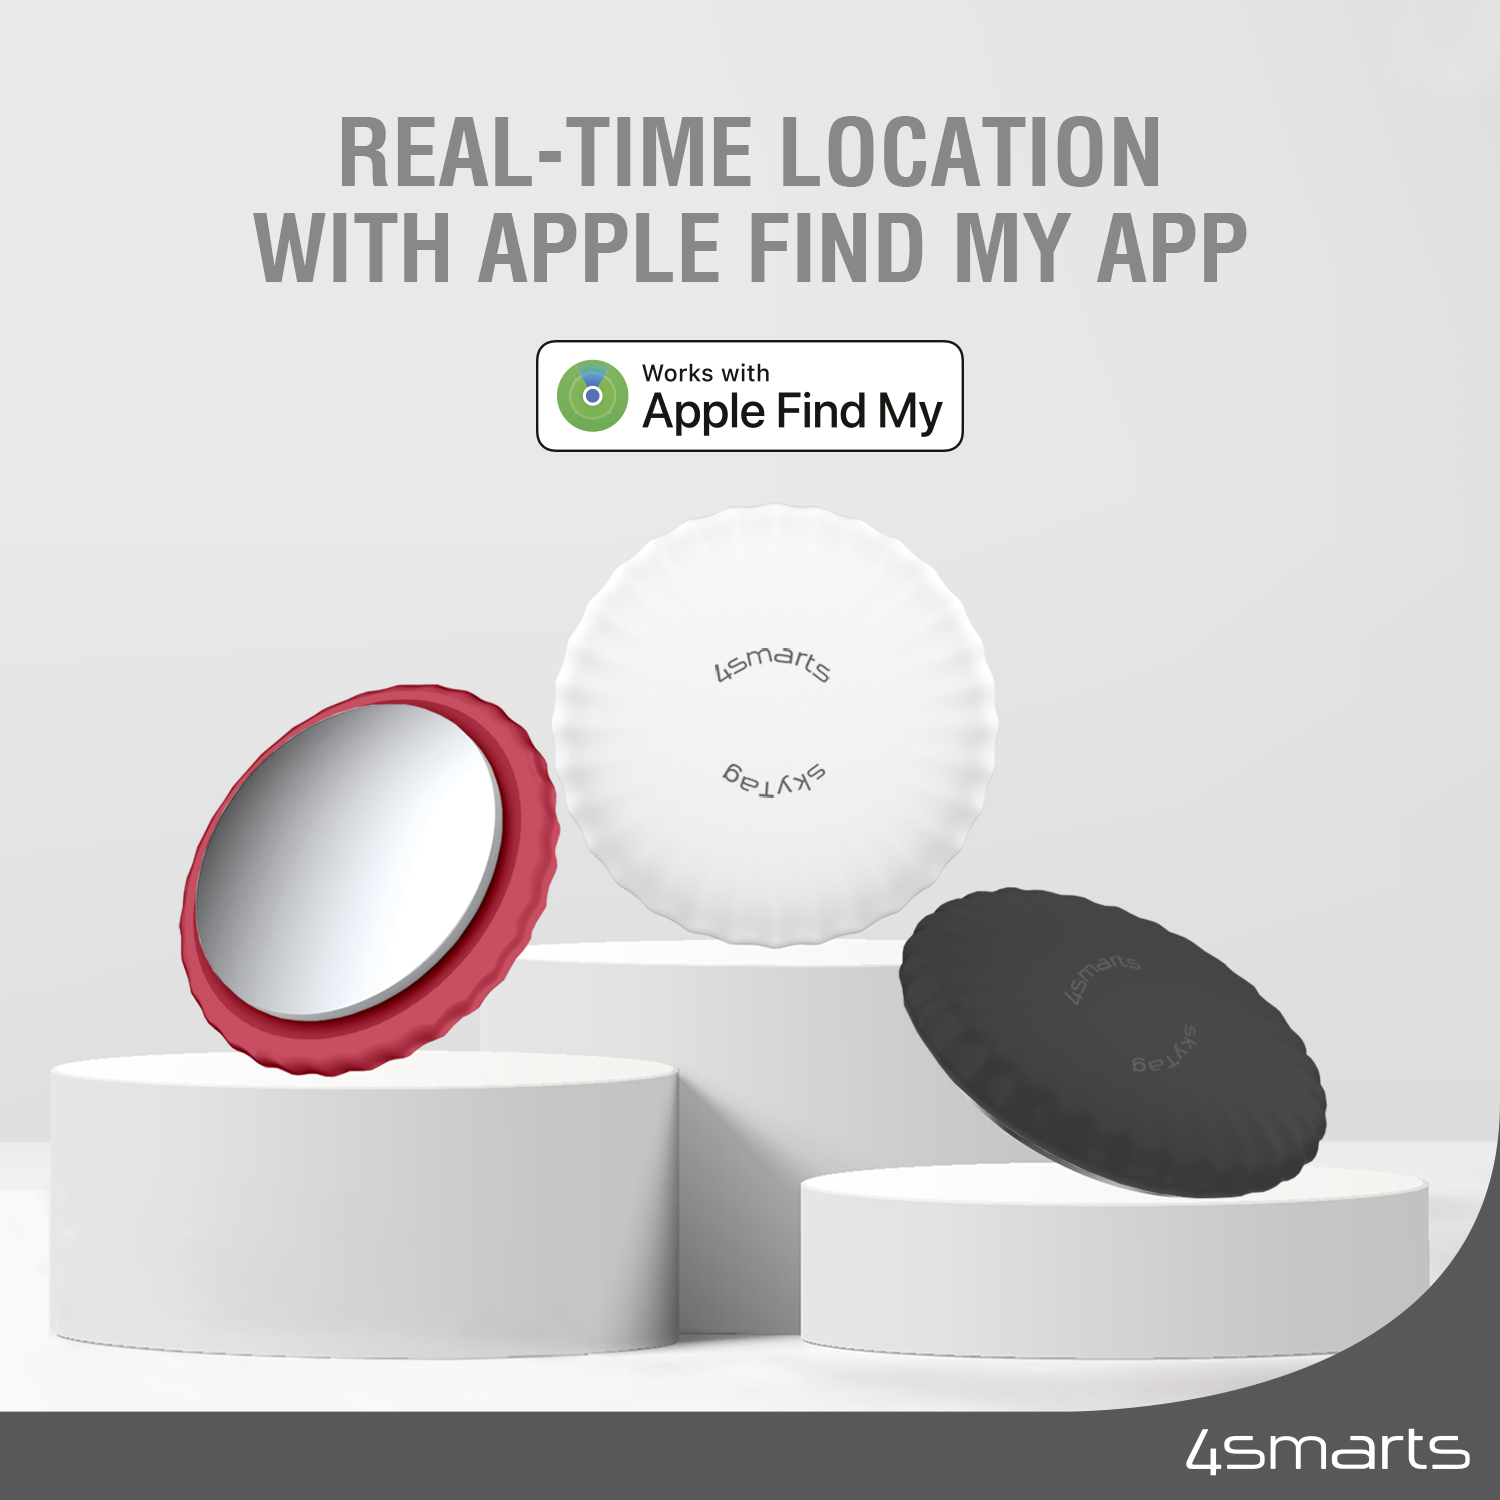 With the 4smarts Location Finder SkyTag Slim you can pinpoint the exact location of your valuables in real time.